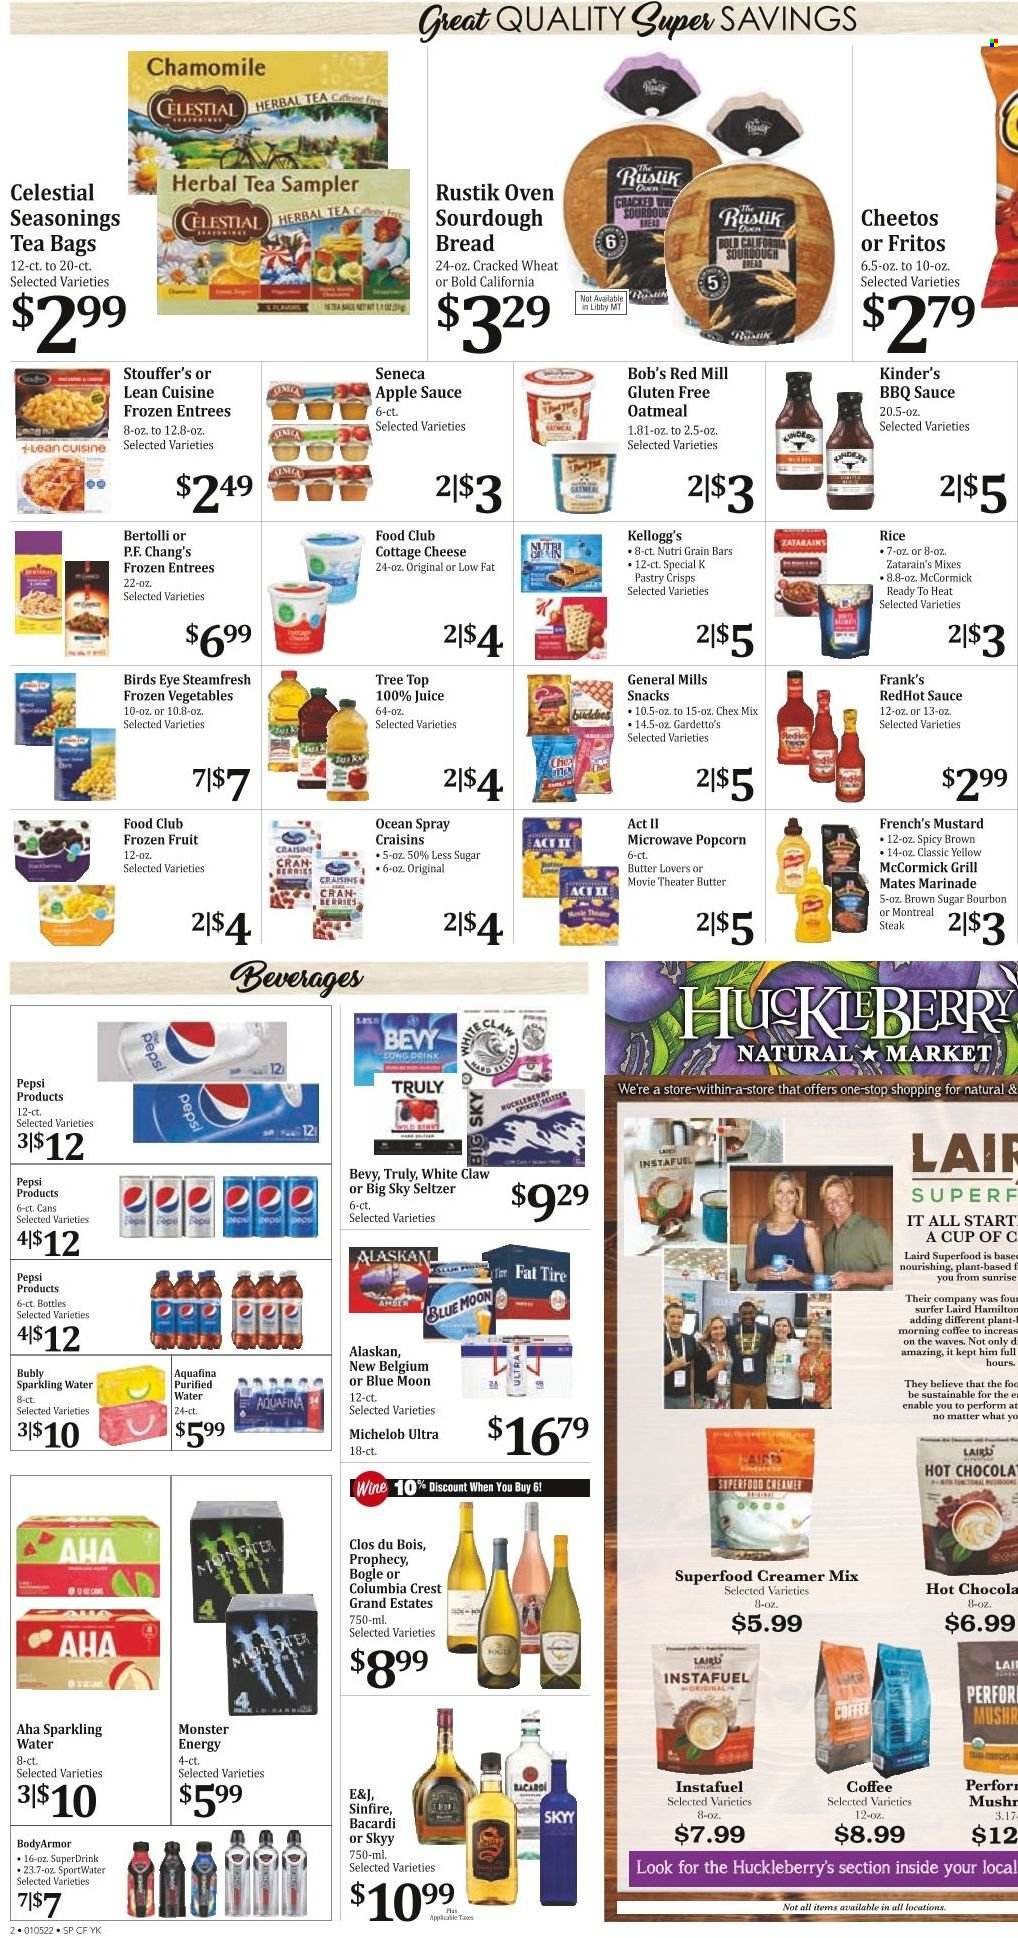 thumbnail - Rosauers Flyer - 01/05/2022 - 01/11/2022 - Sales products - bread, sourdough bread, sauce, Bird's Eye, Lean Cuisine, Bertolli, cottage cheese, cheese, creamer, frozen vegetables, Stouffer's, snack, Kellogg's, Fritos, Cheetos, popcorn, Chex Mix, oatmeal, craisins, Nutri-Grain, rice, mustard, marinade, apple sauce, dried fruit, Pepsi, juice, Monster, Monster Energy, Aquafina, seltzer water, sparkling water, purified water, herbal tea, tea bags, SKYY, White Claw, TRULY, beer, steak, Crest, Blue Moon, Michelob. Page 2.